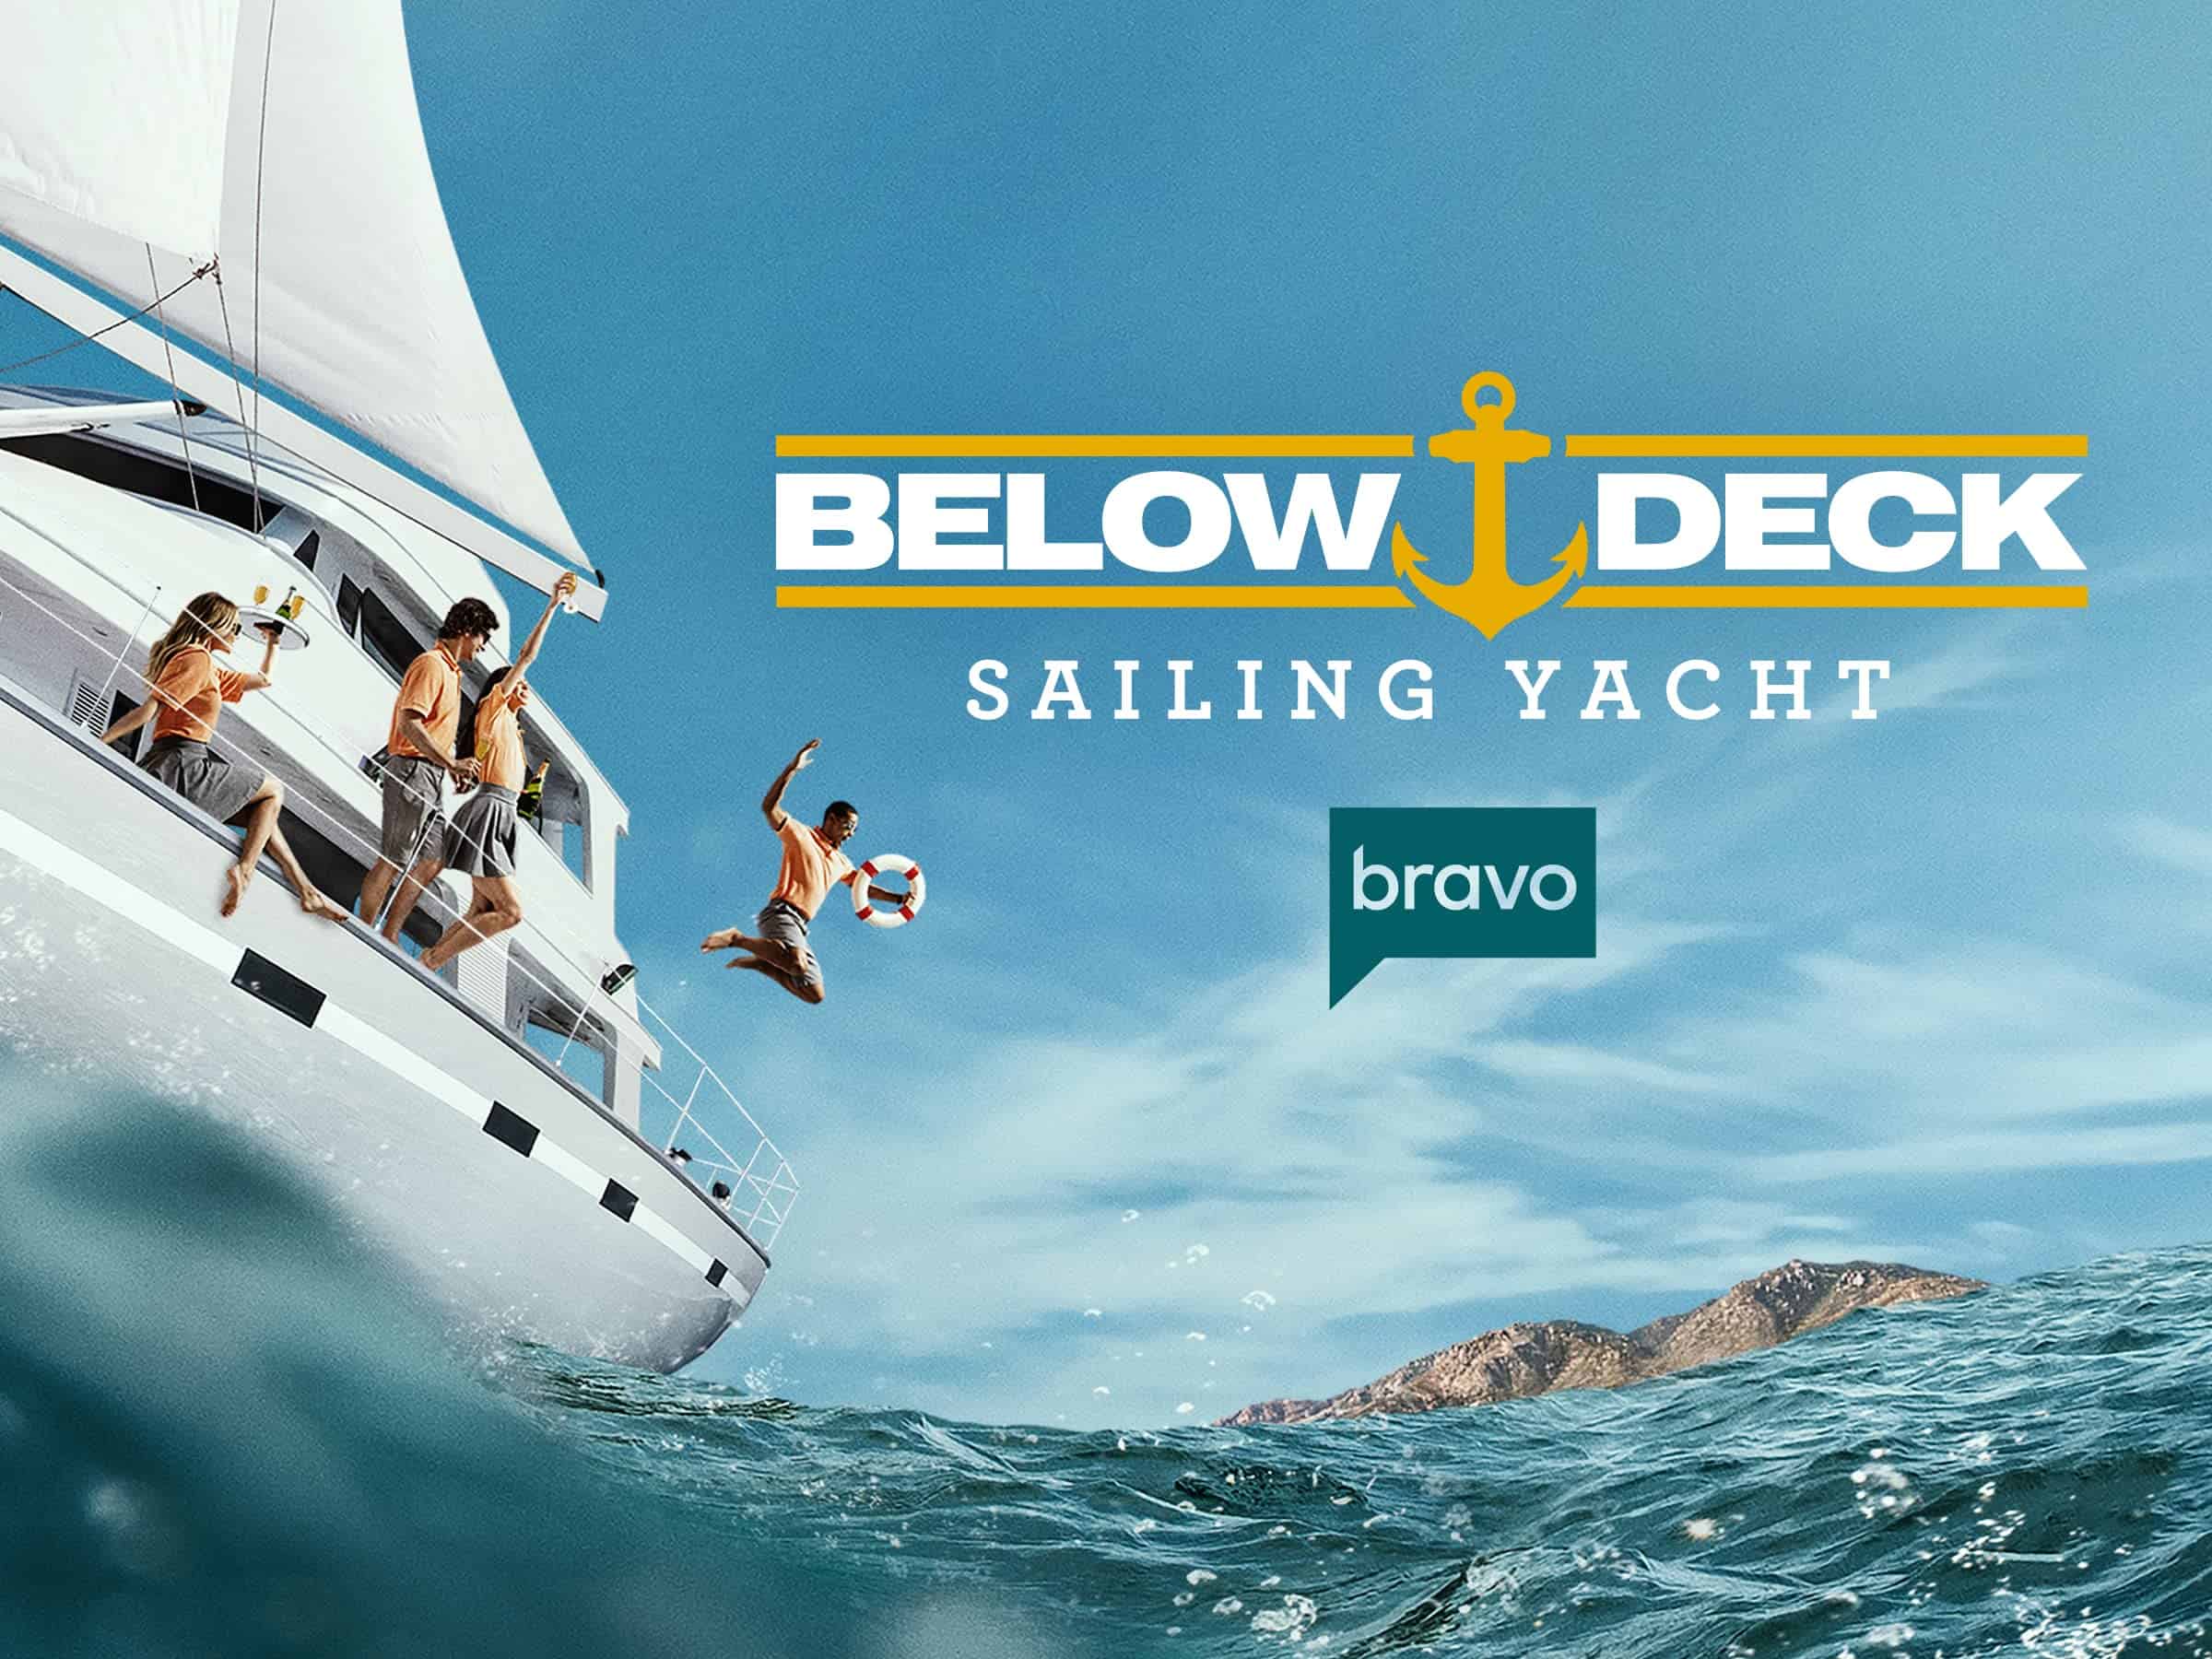 All About the Latest Season of “Below Deck Sailing Yacht”